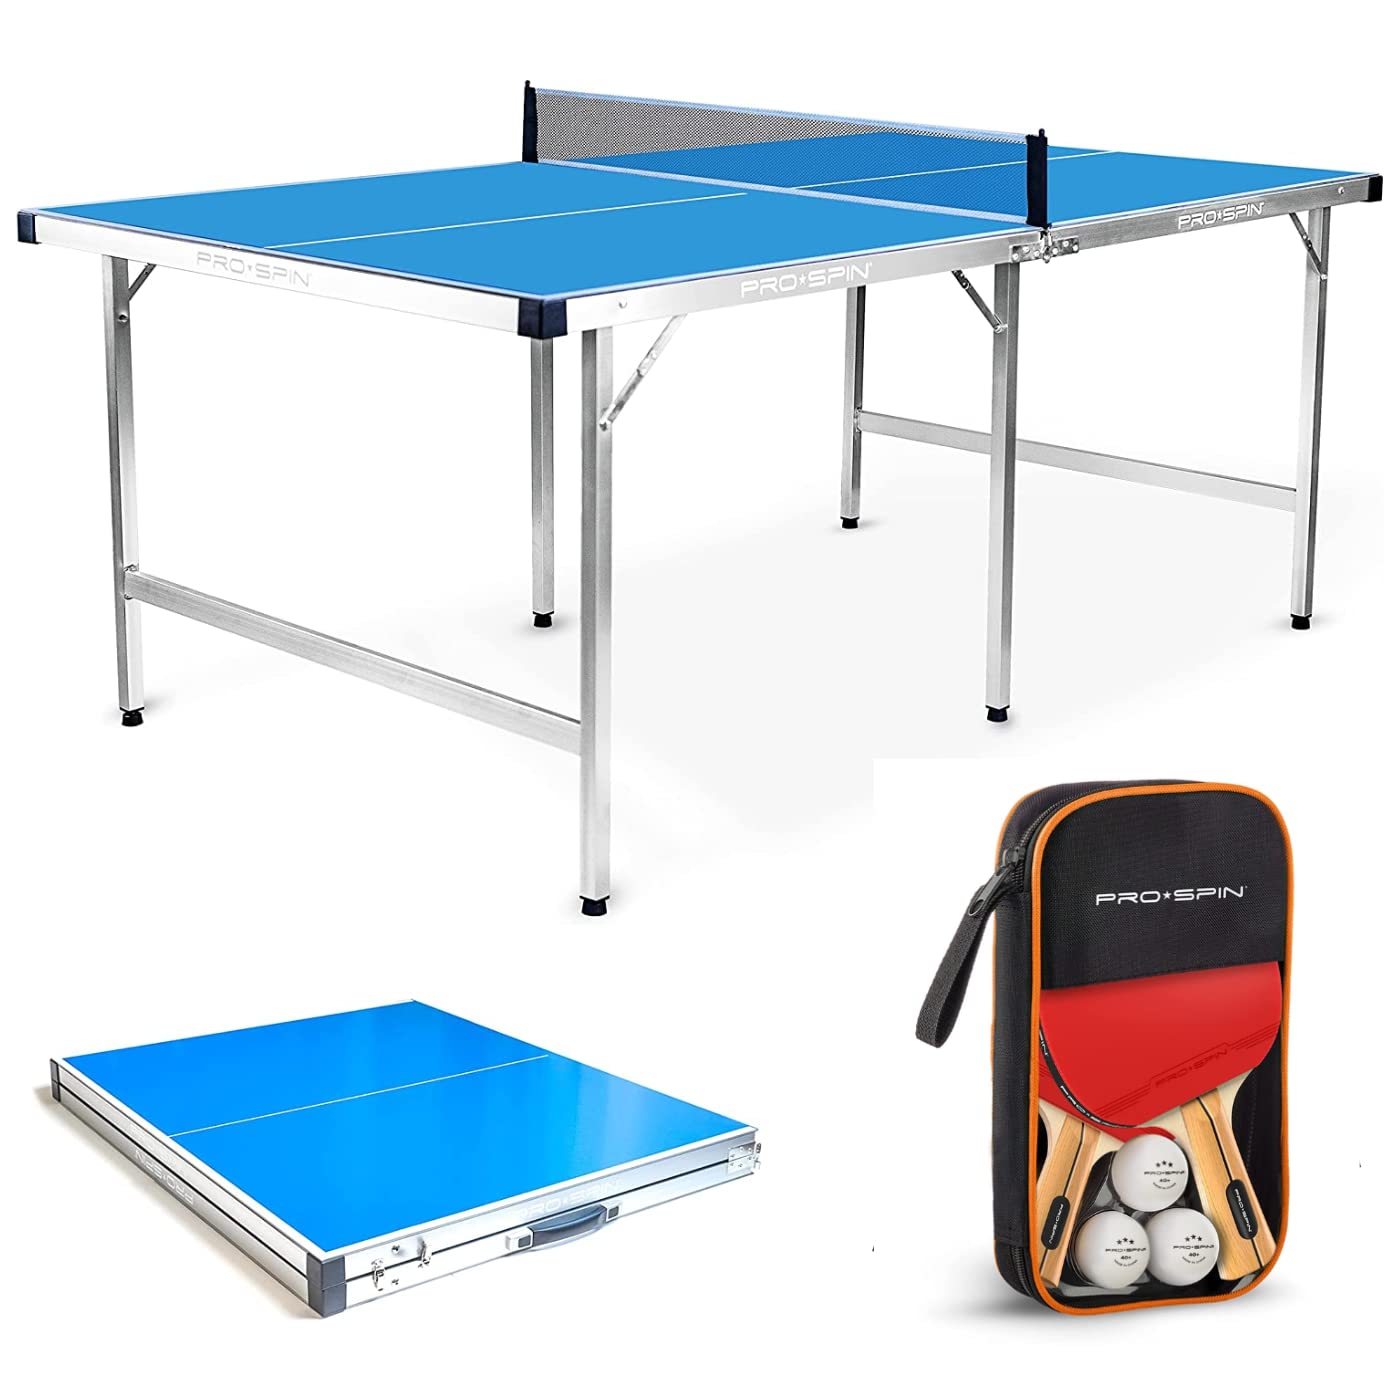 PRO-SPIN Midsize Ping Pong Table Set